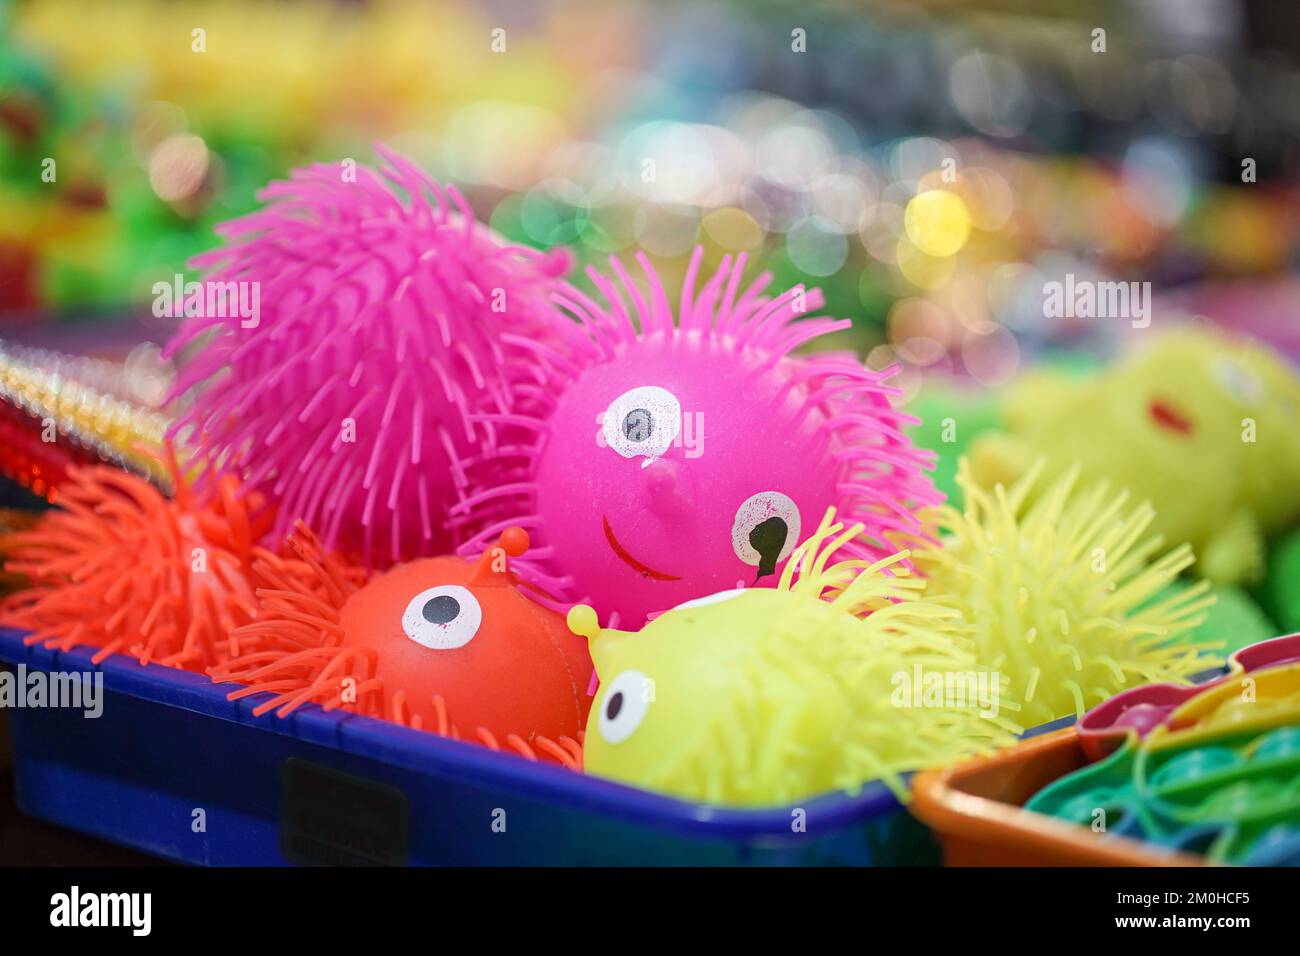 Colorful funny toys hedgehogs in Pink, Yellow, orange color made of rubber or plastic selling in indian fair market Stock Photo